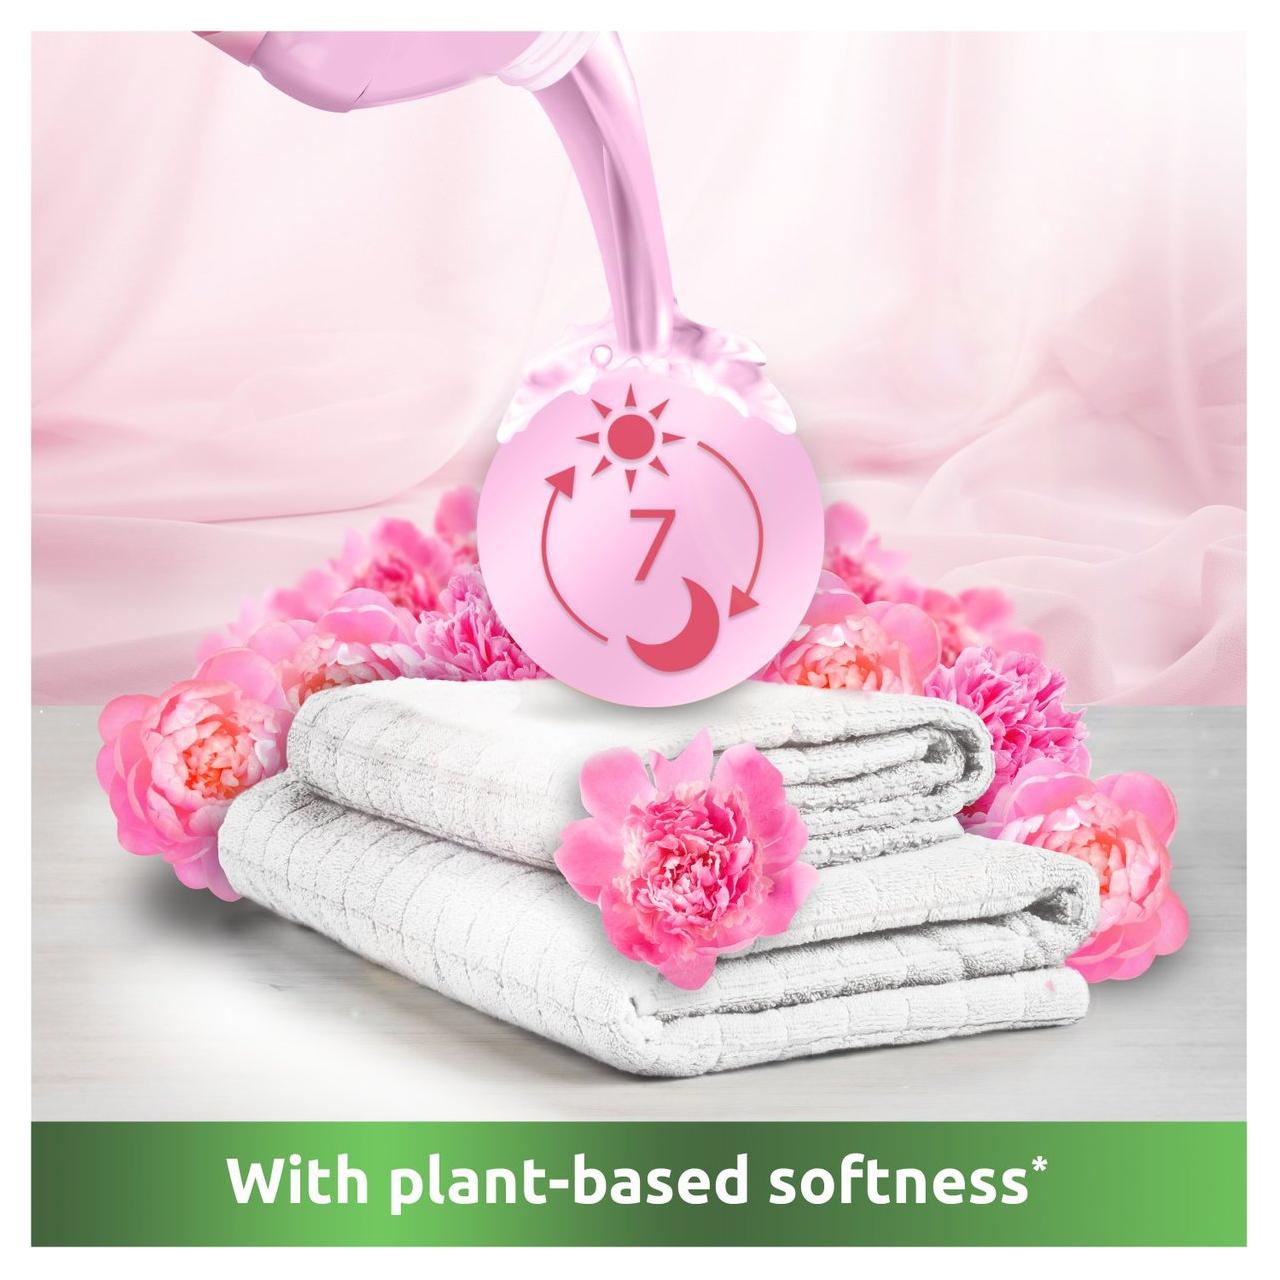 Bold & Lenor Laundry Washing Pack, Pink Blossom Scent: Washing Capsules & Fabric Conditioner